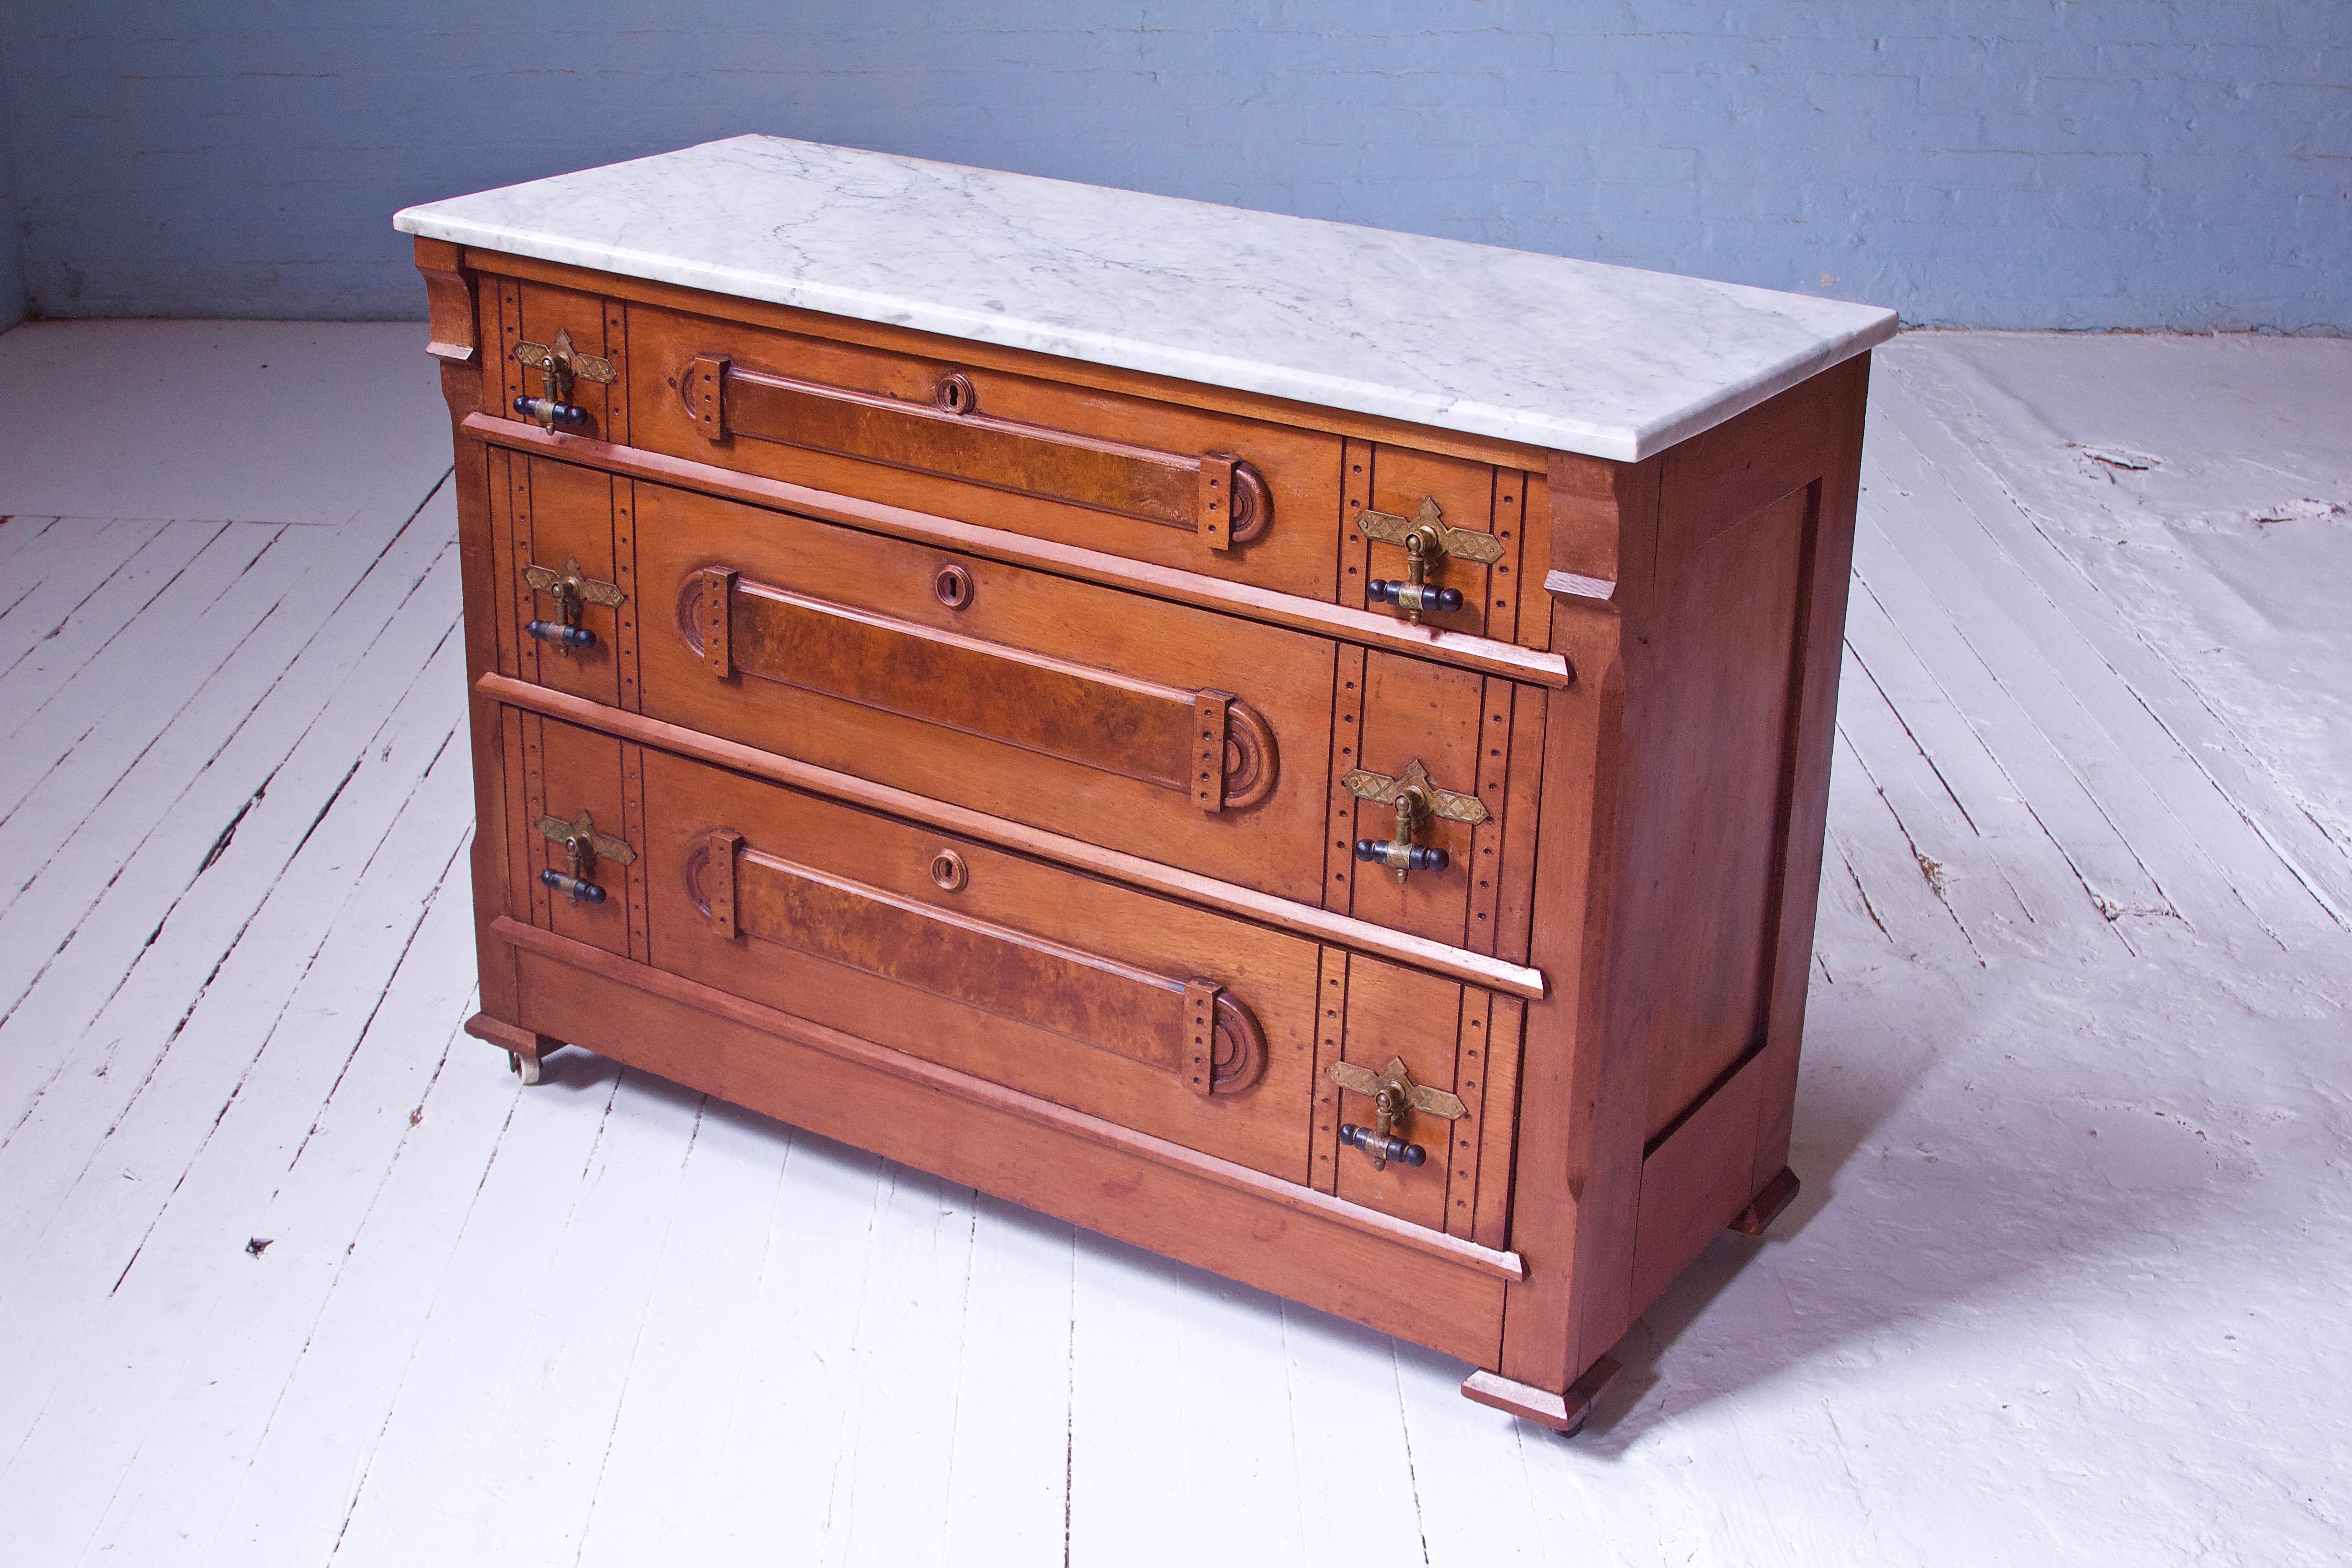 A nice petite dresser by Brooks Brothers, NY; the oldest clothing retailer in the United States and a company that up until the early 20th century, manufactured all types of home goods and furnishings. Brooks Brothers was founded in 1818 in lower